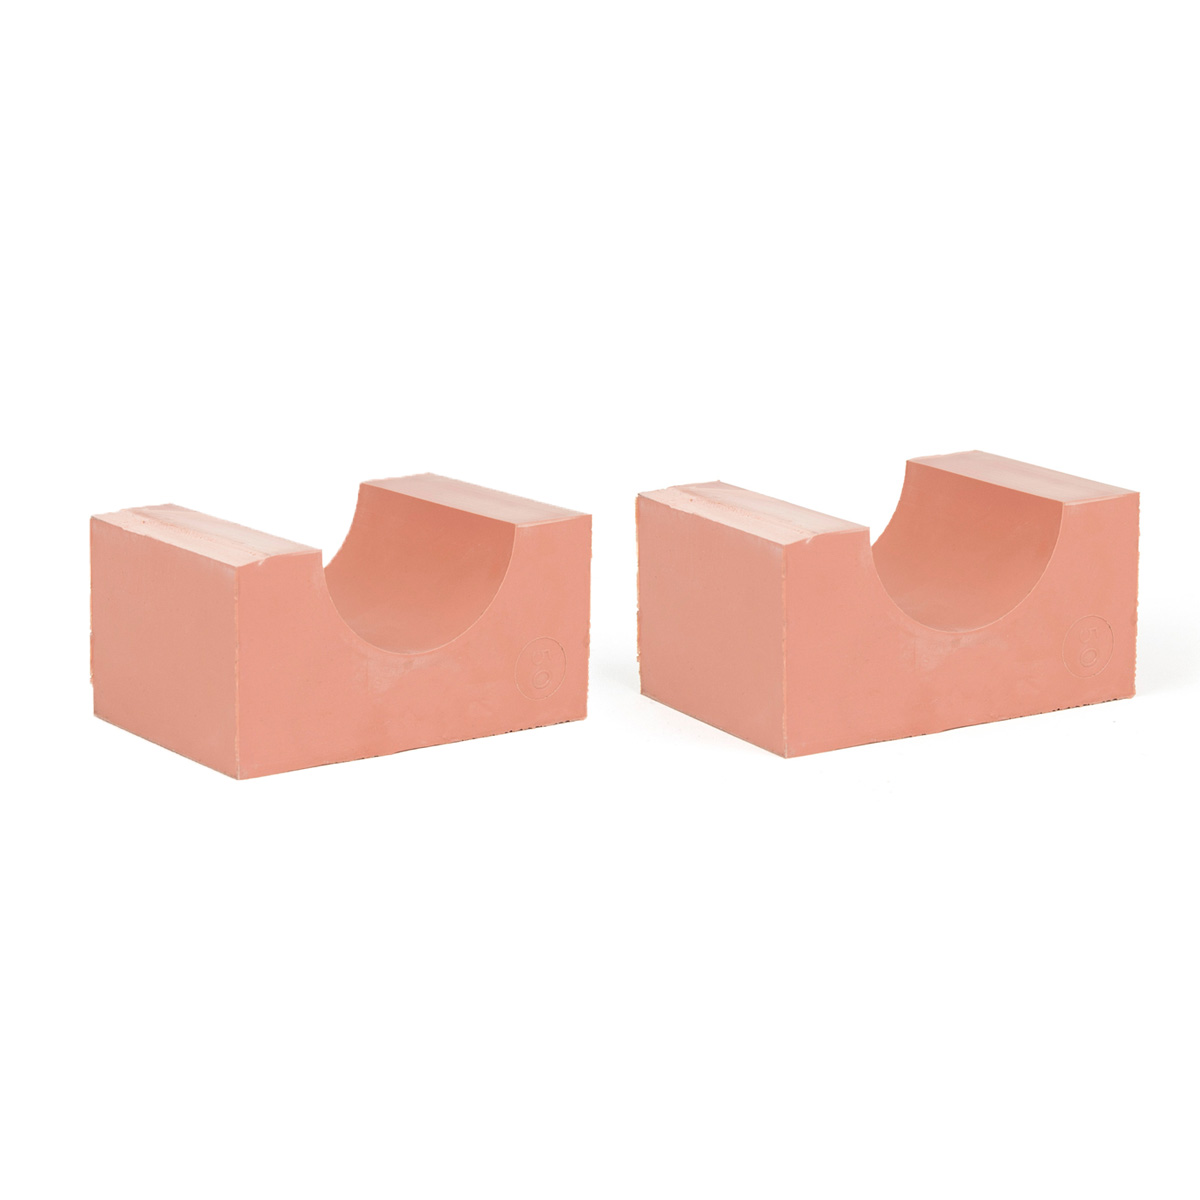 90-50*2 Set of 2 half insert block lycron, 90-50 for cable/pipe diam. 49.5-51.5mm